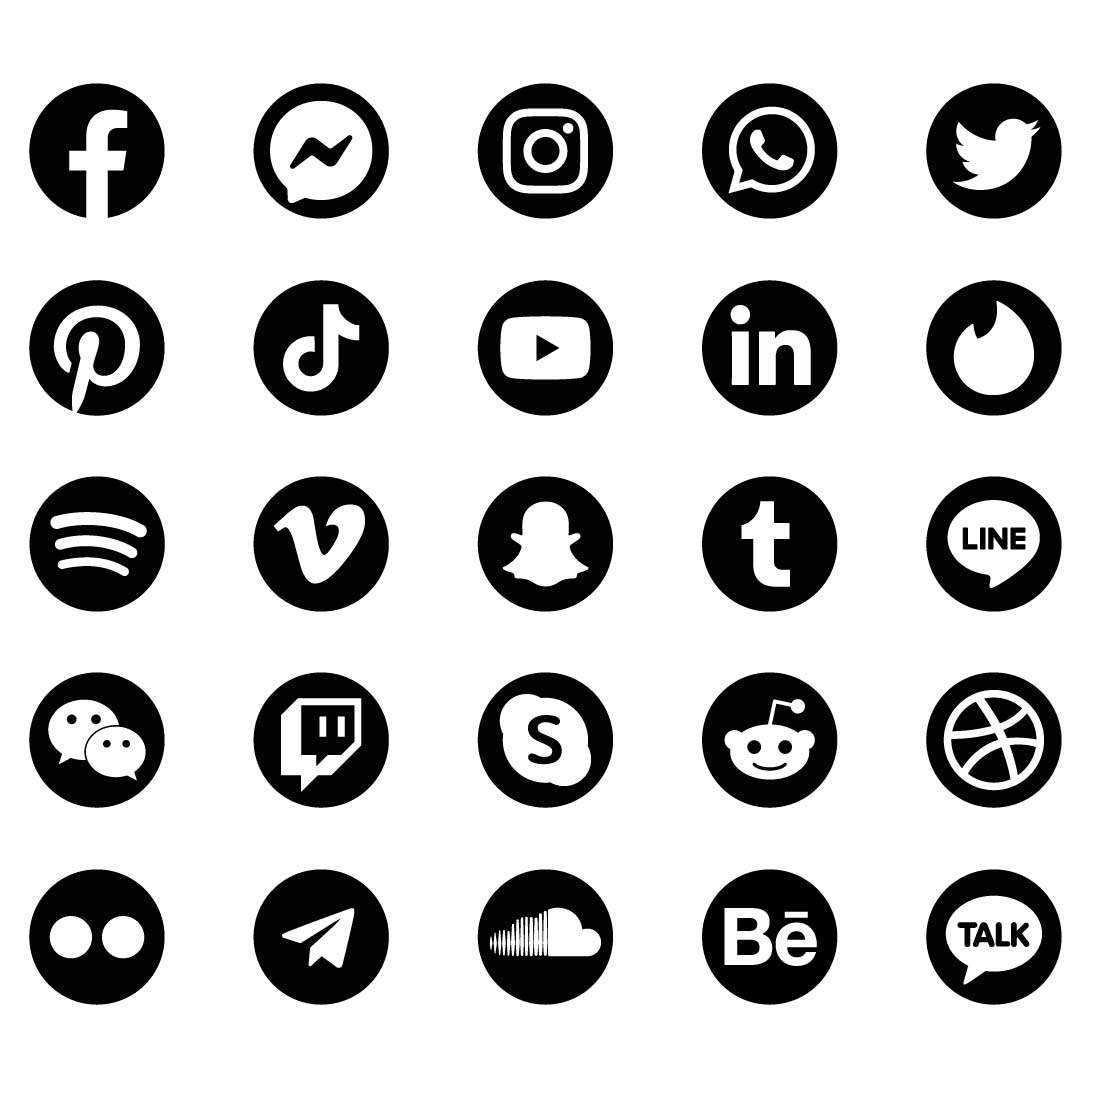 SOCIAL MEDIA ICONS cover image.